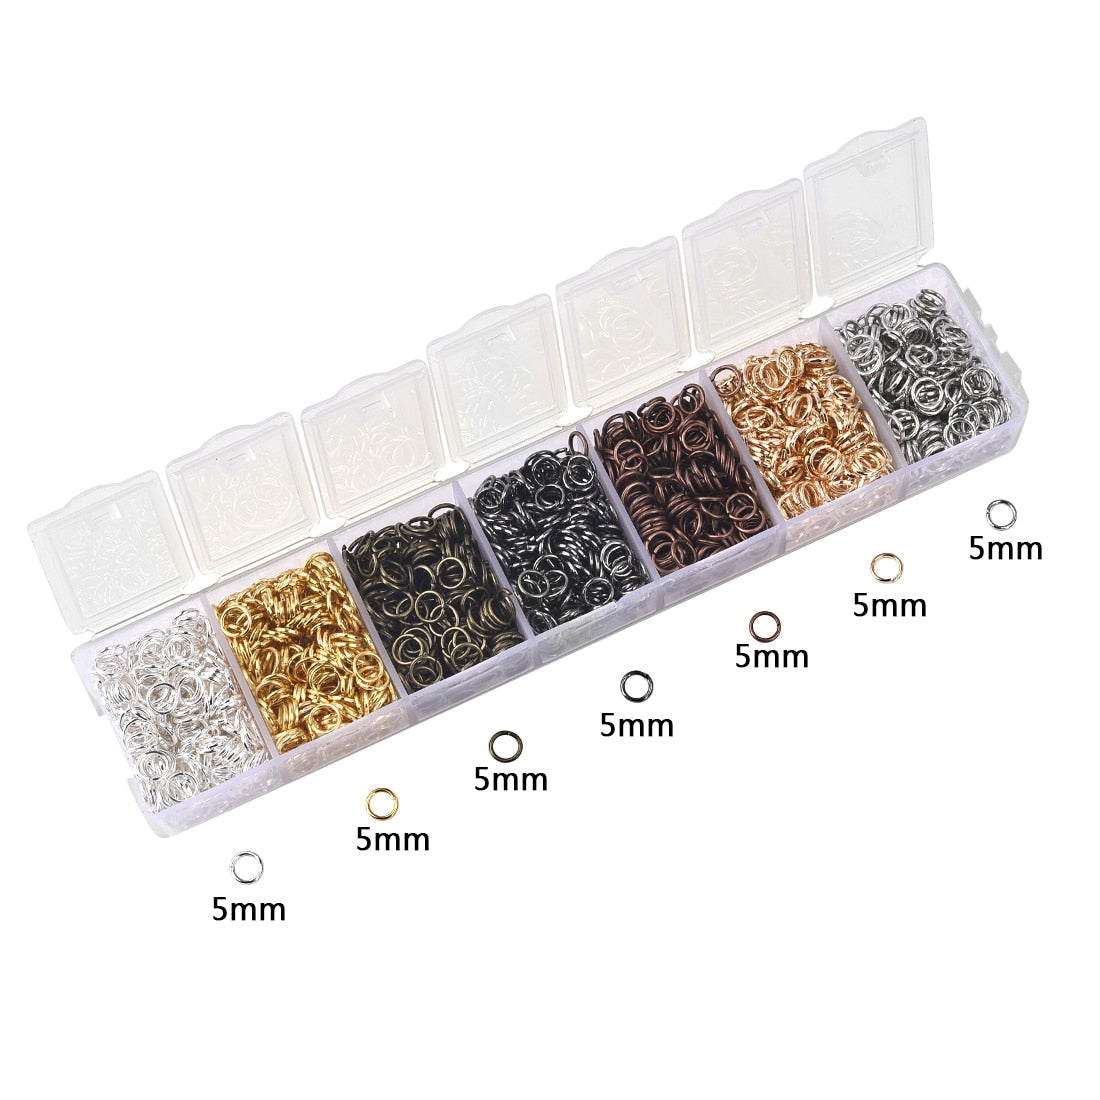 450-860pcs/Box Jewelry Making Kits Lobster Clasp Open Jump Rings End Crimps Beads Box Sets Handmade Bracelet Necklace Findings